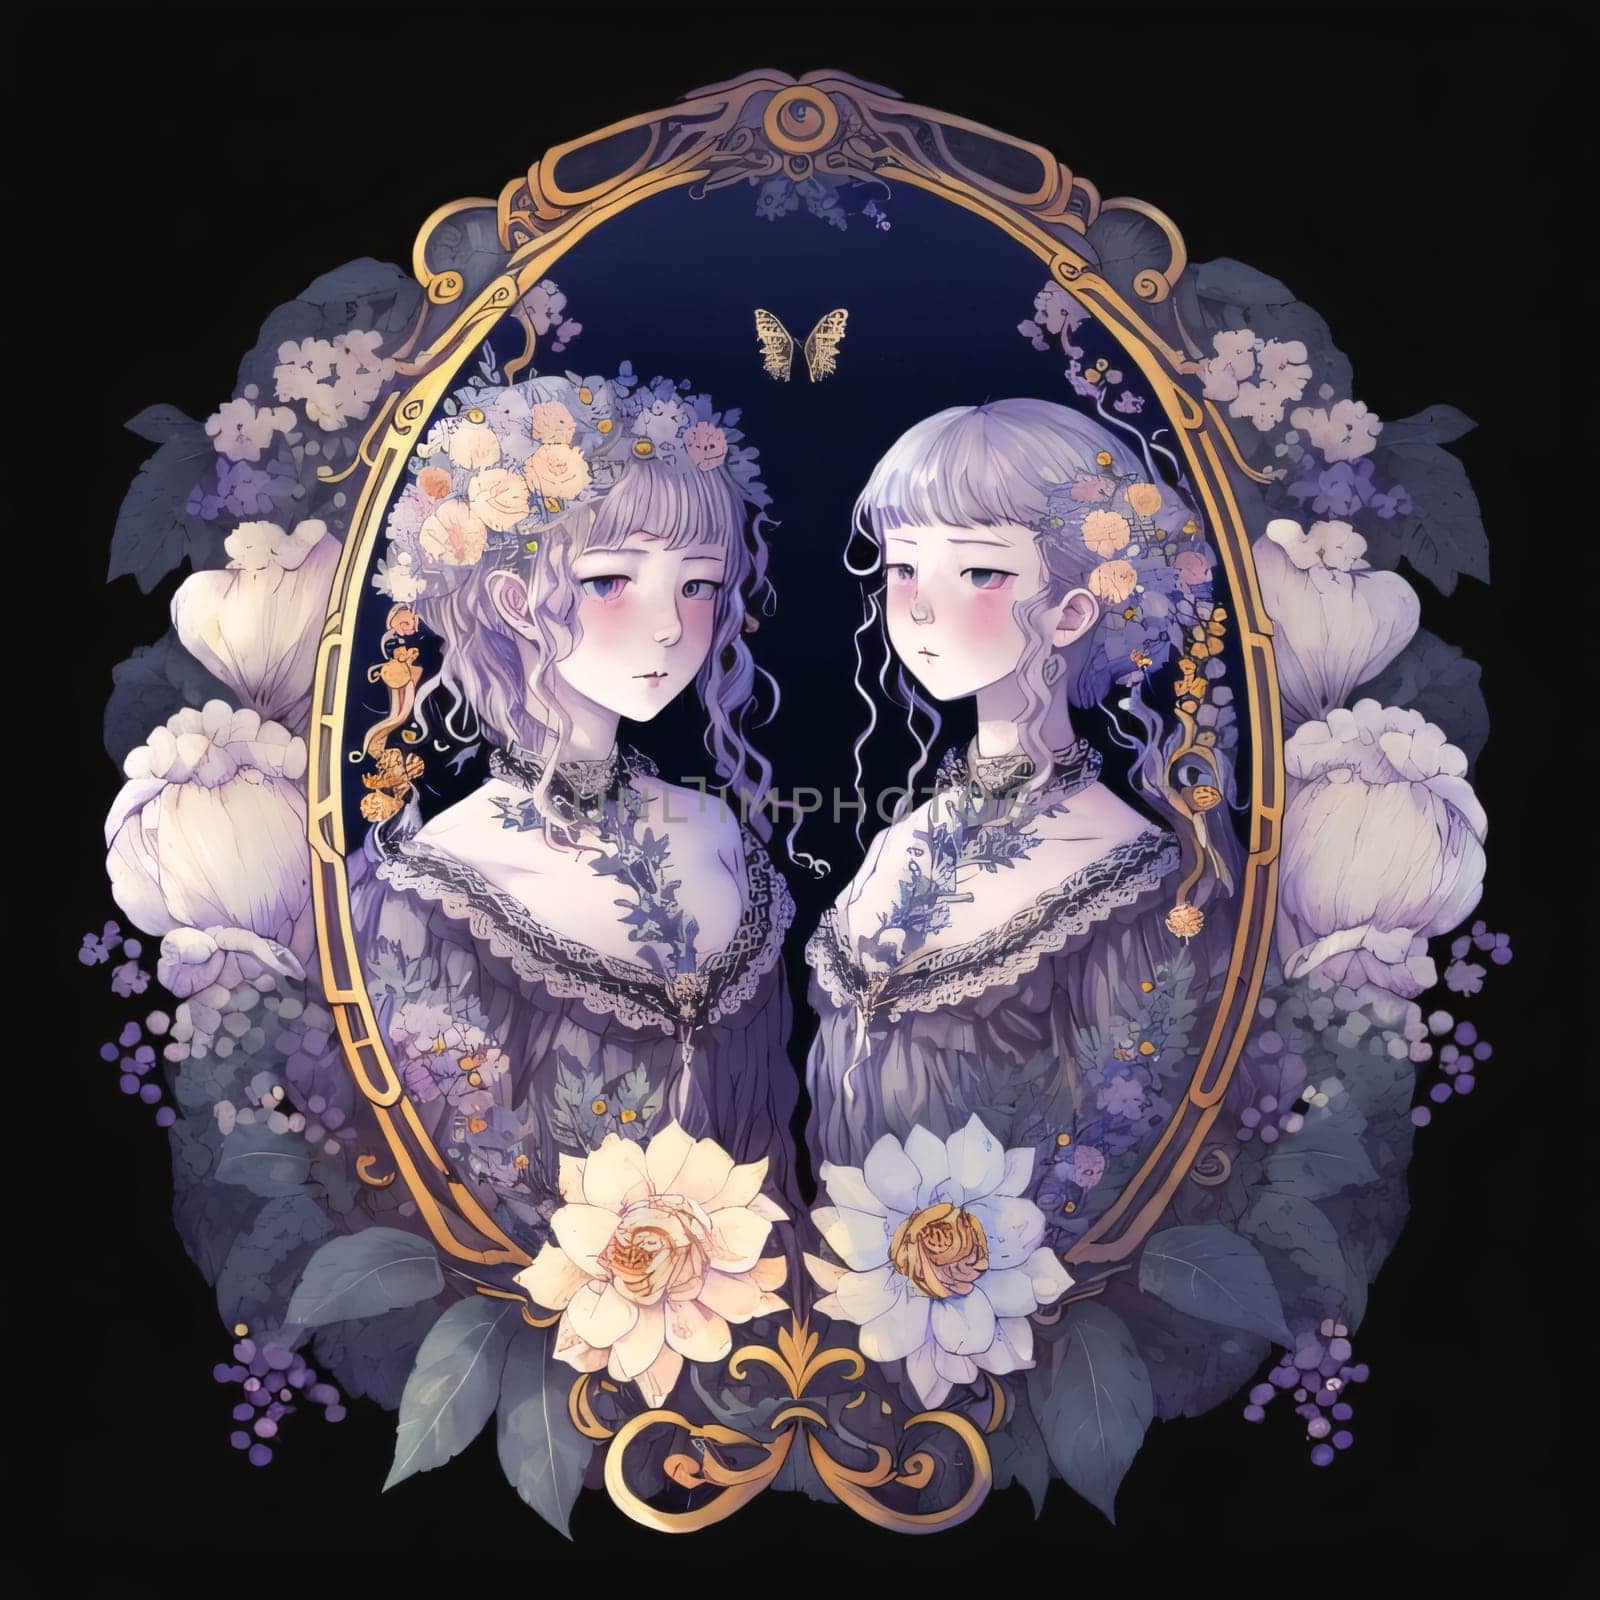 Signs of the zodiac: Watercolor illustration of two girls with flowers in vintage frame on black background.